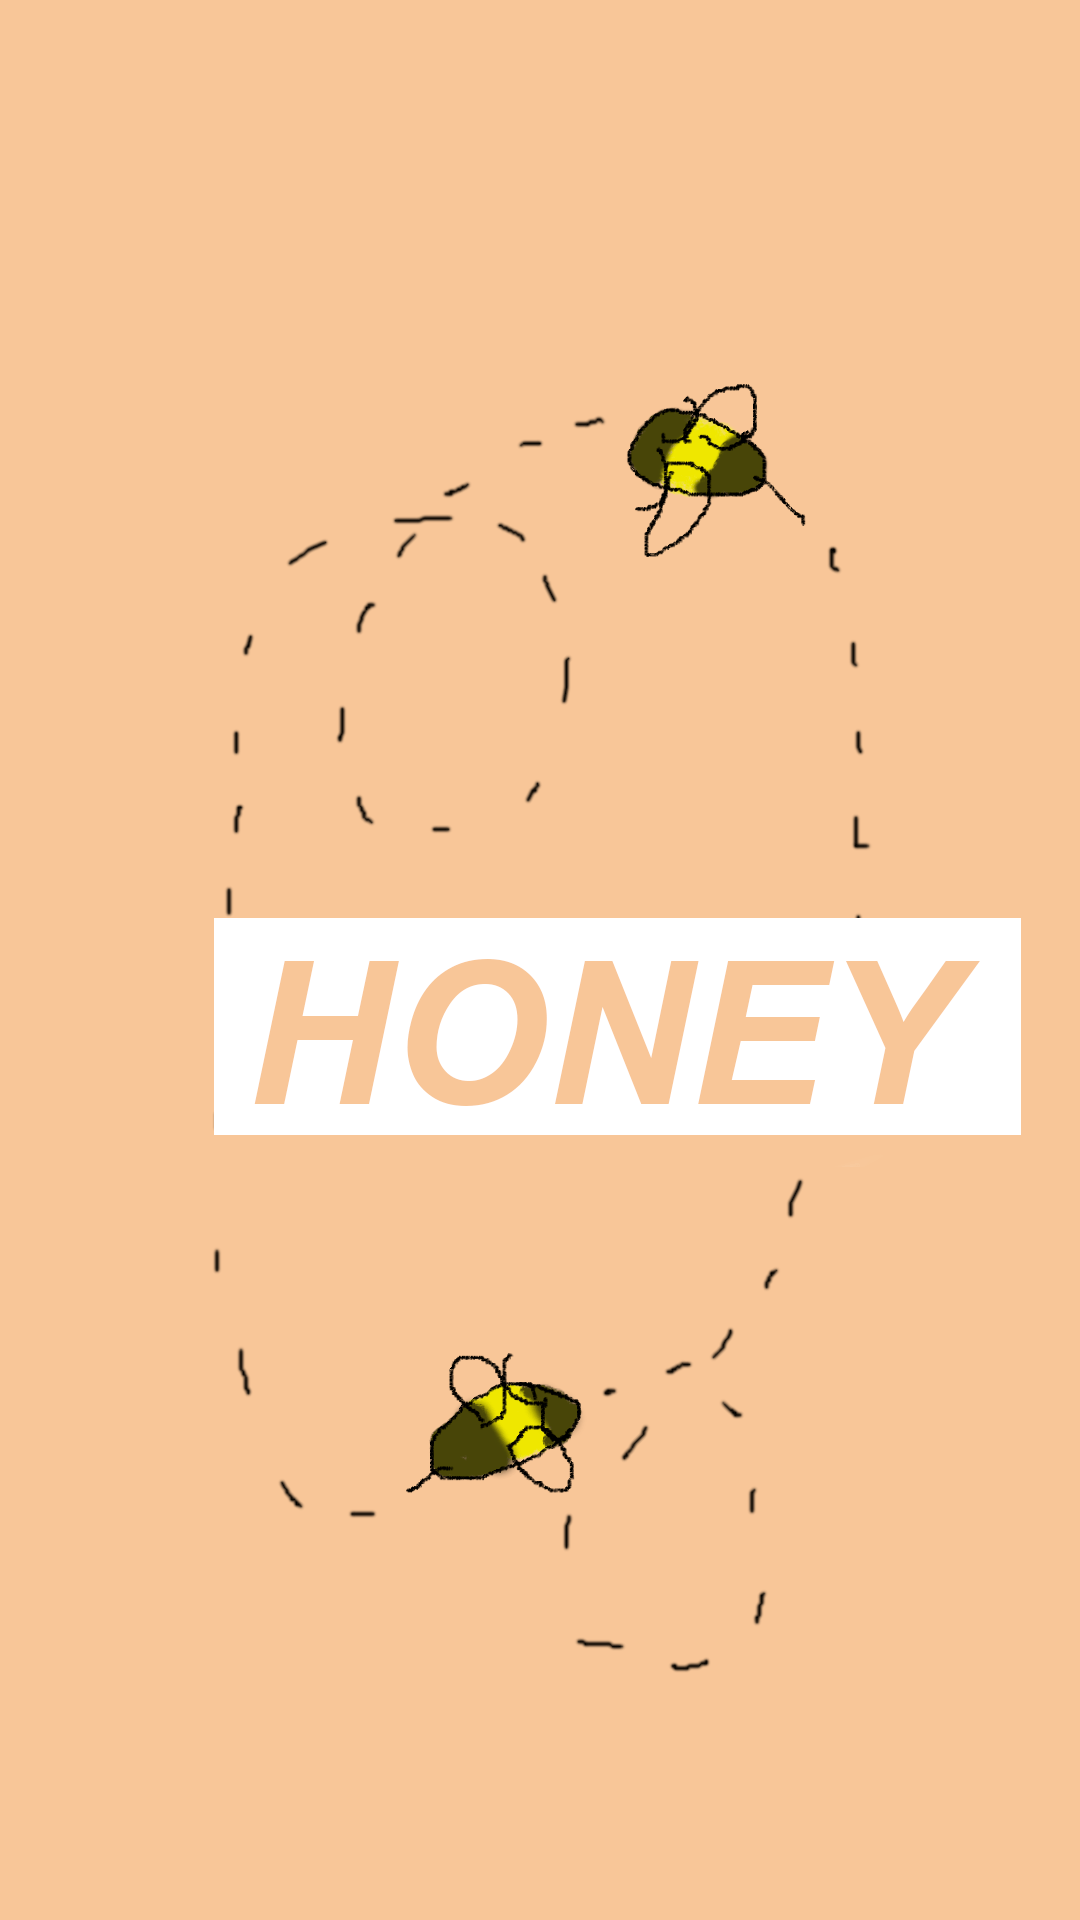 An aesthetic image with two bees flying around the word 